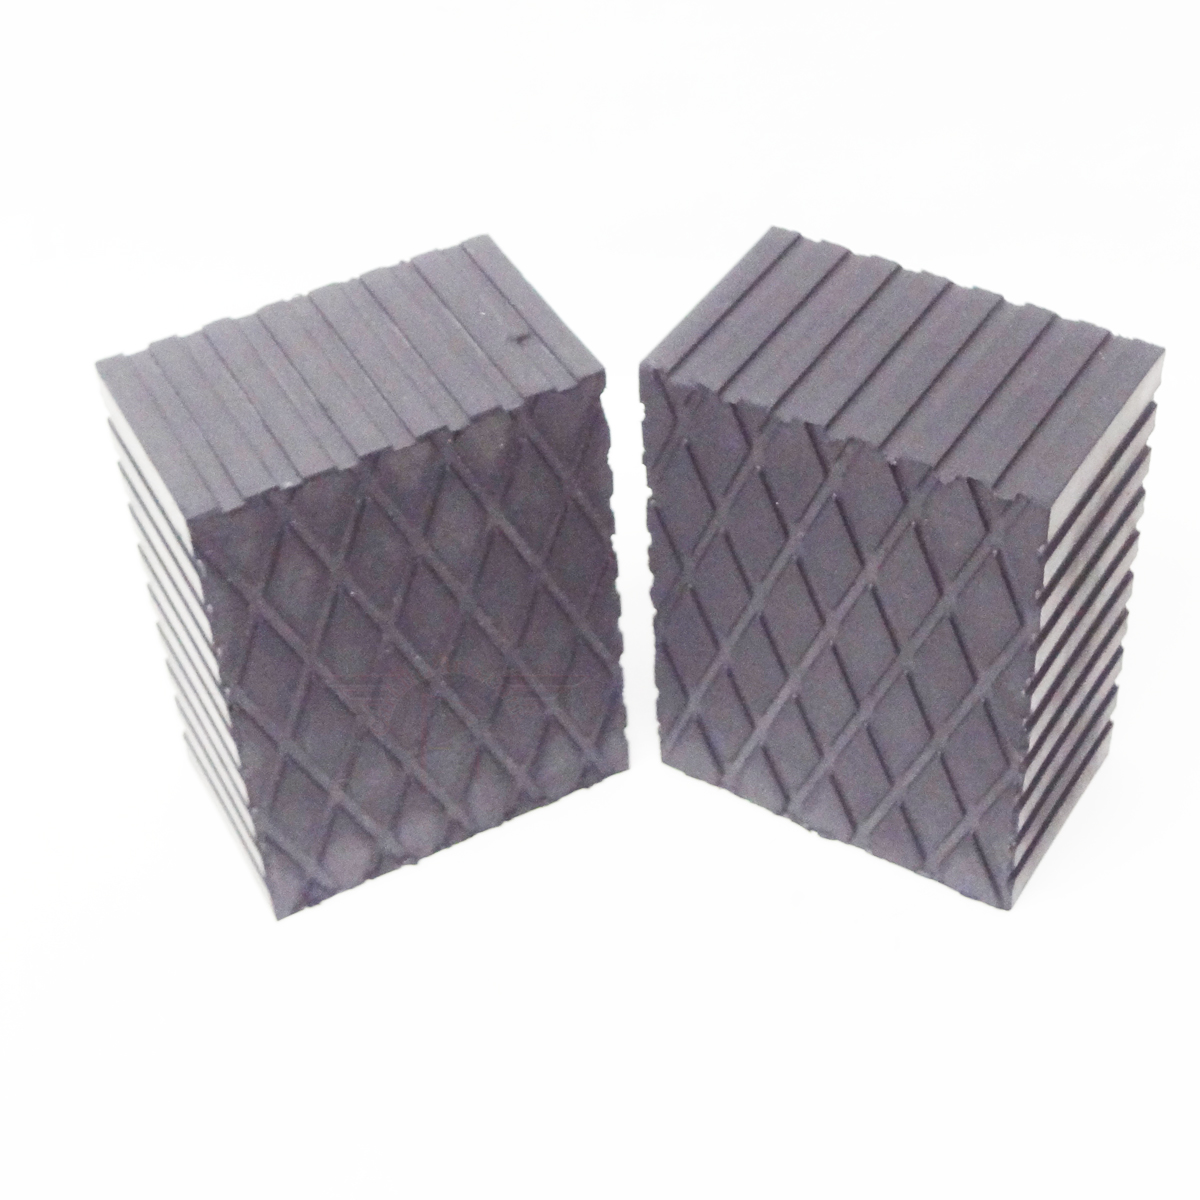 Solid Rubber Block Lift Adapters - Two Sizes